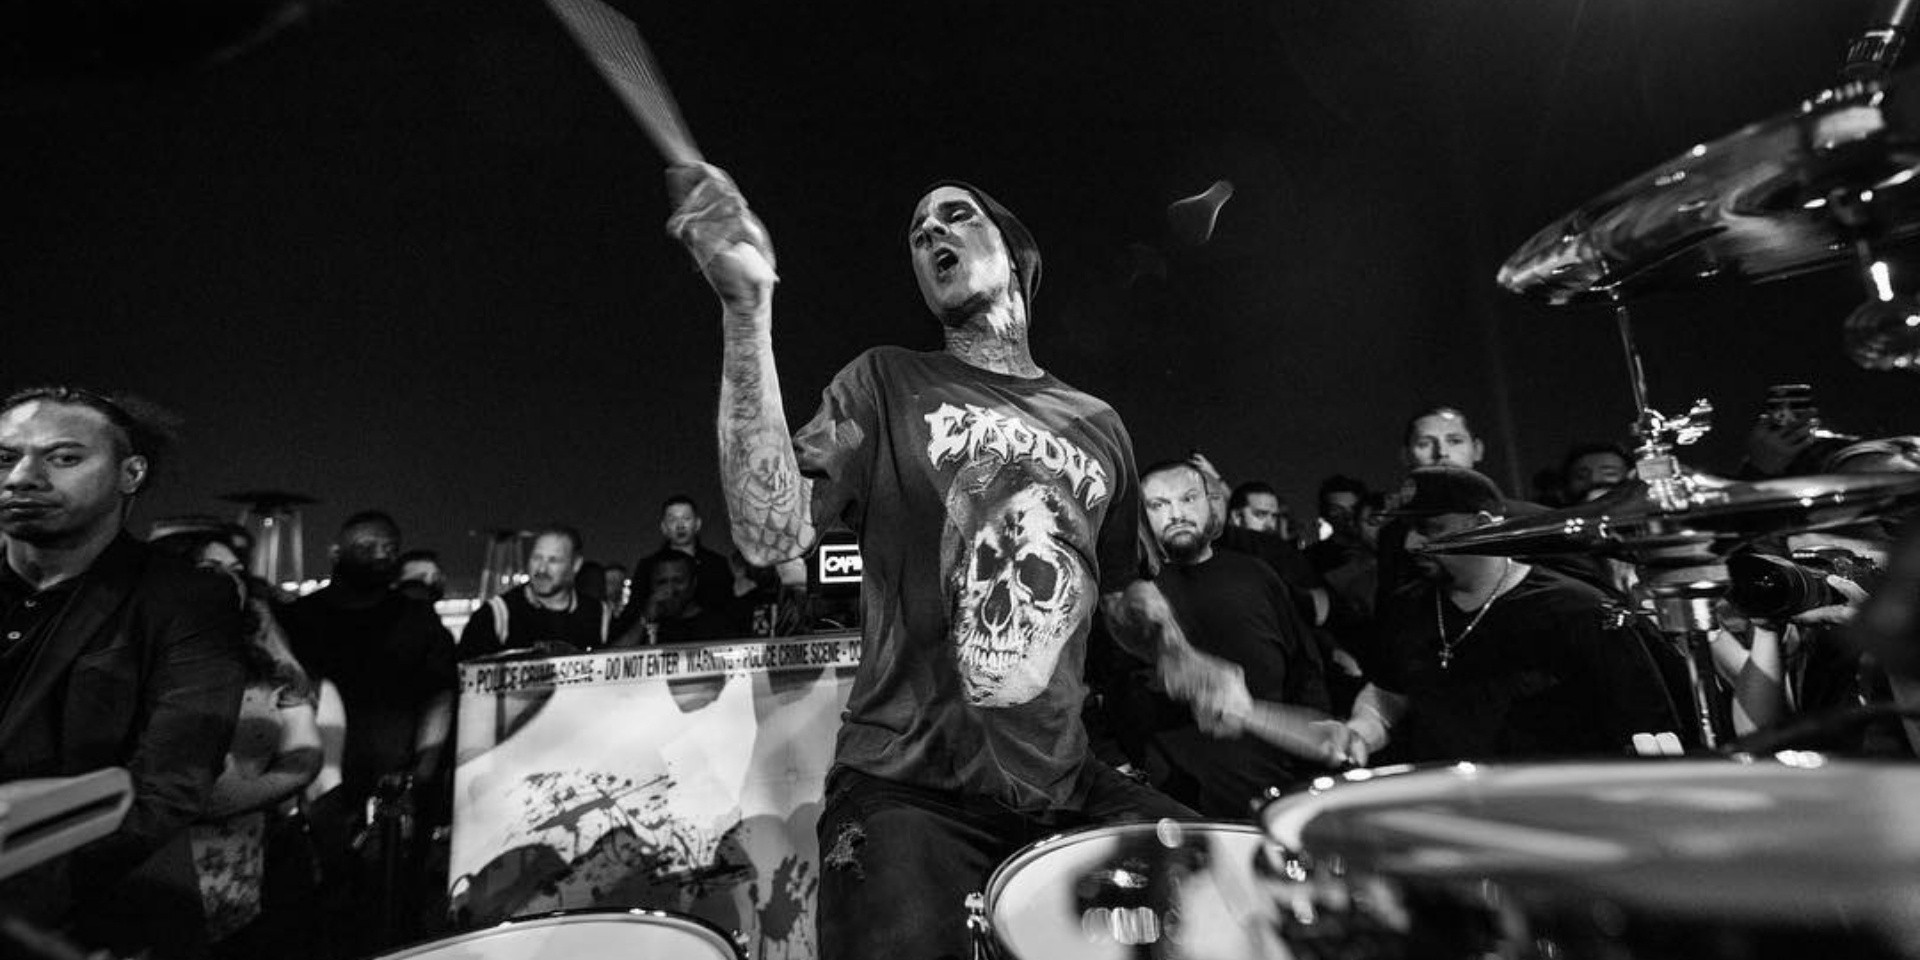 Travis Barker reveals that upcoming Blink-182 album will be "experimental"